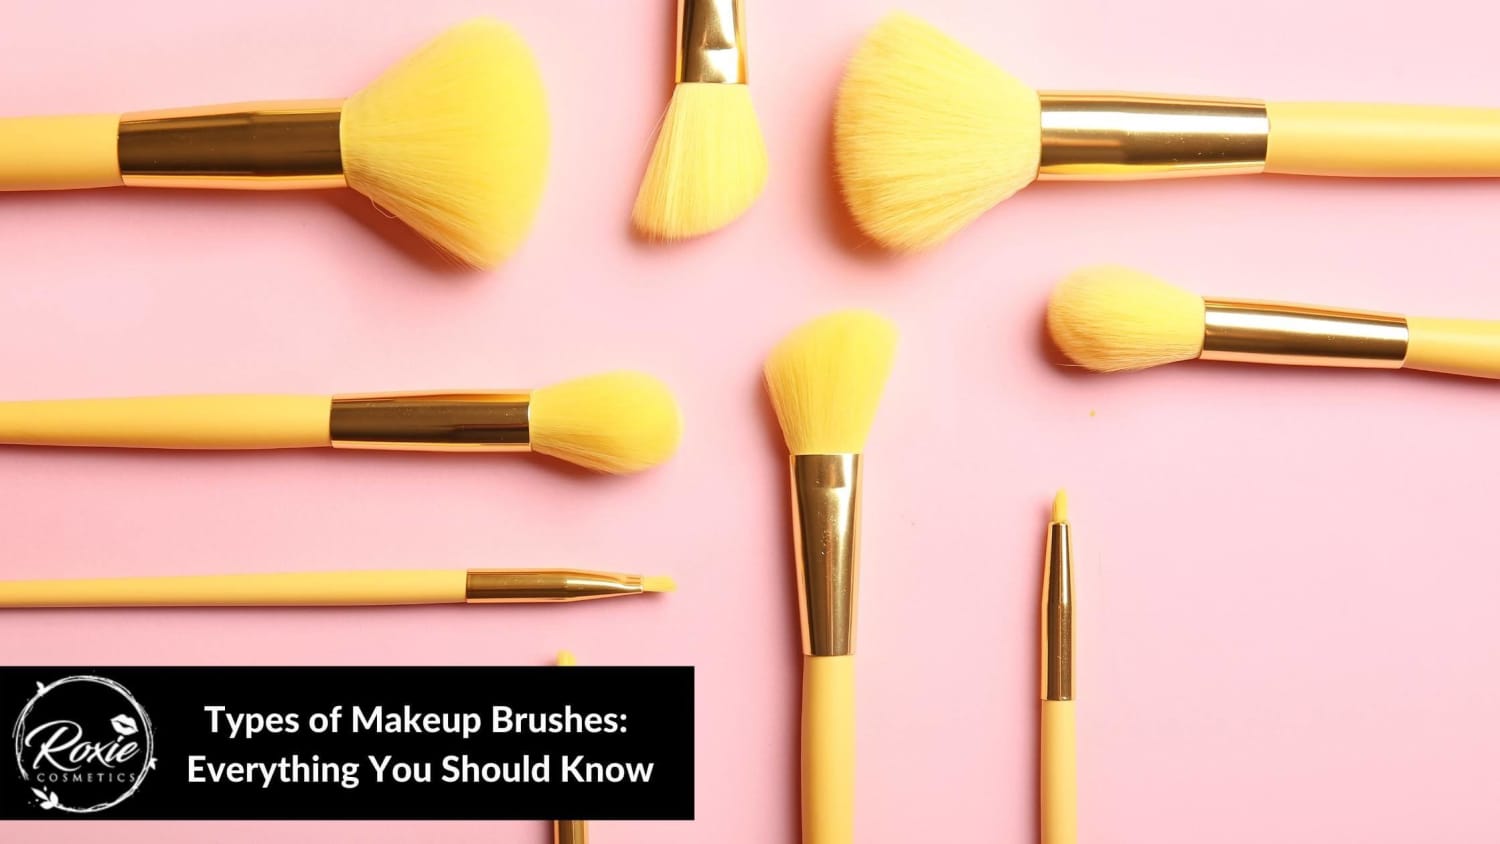 Types of Makeup Brushes: Everything You Should Know